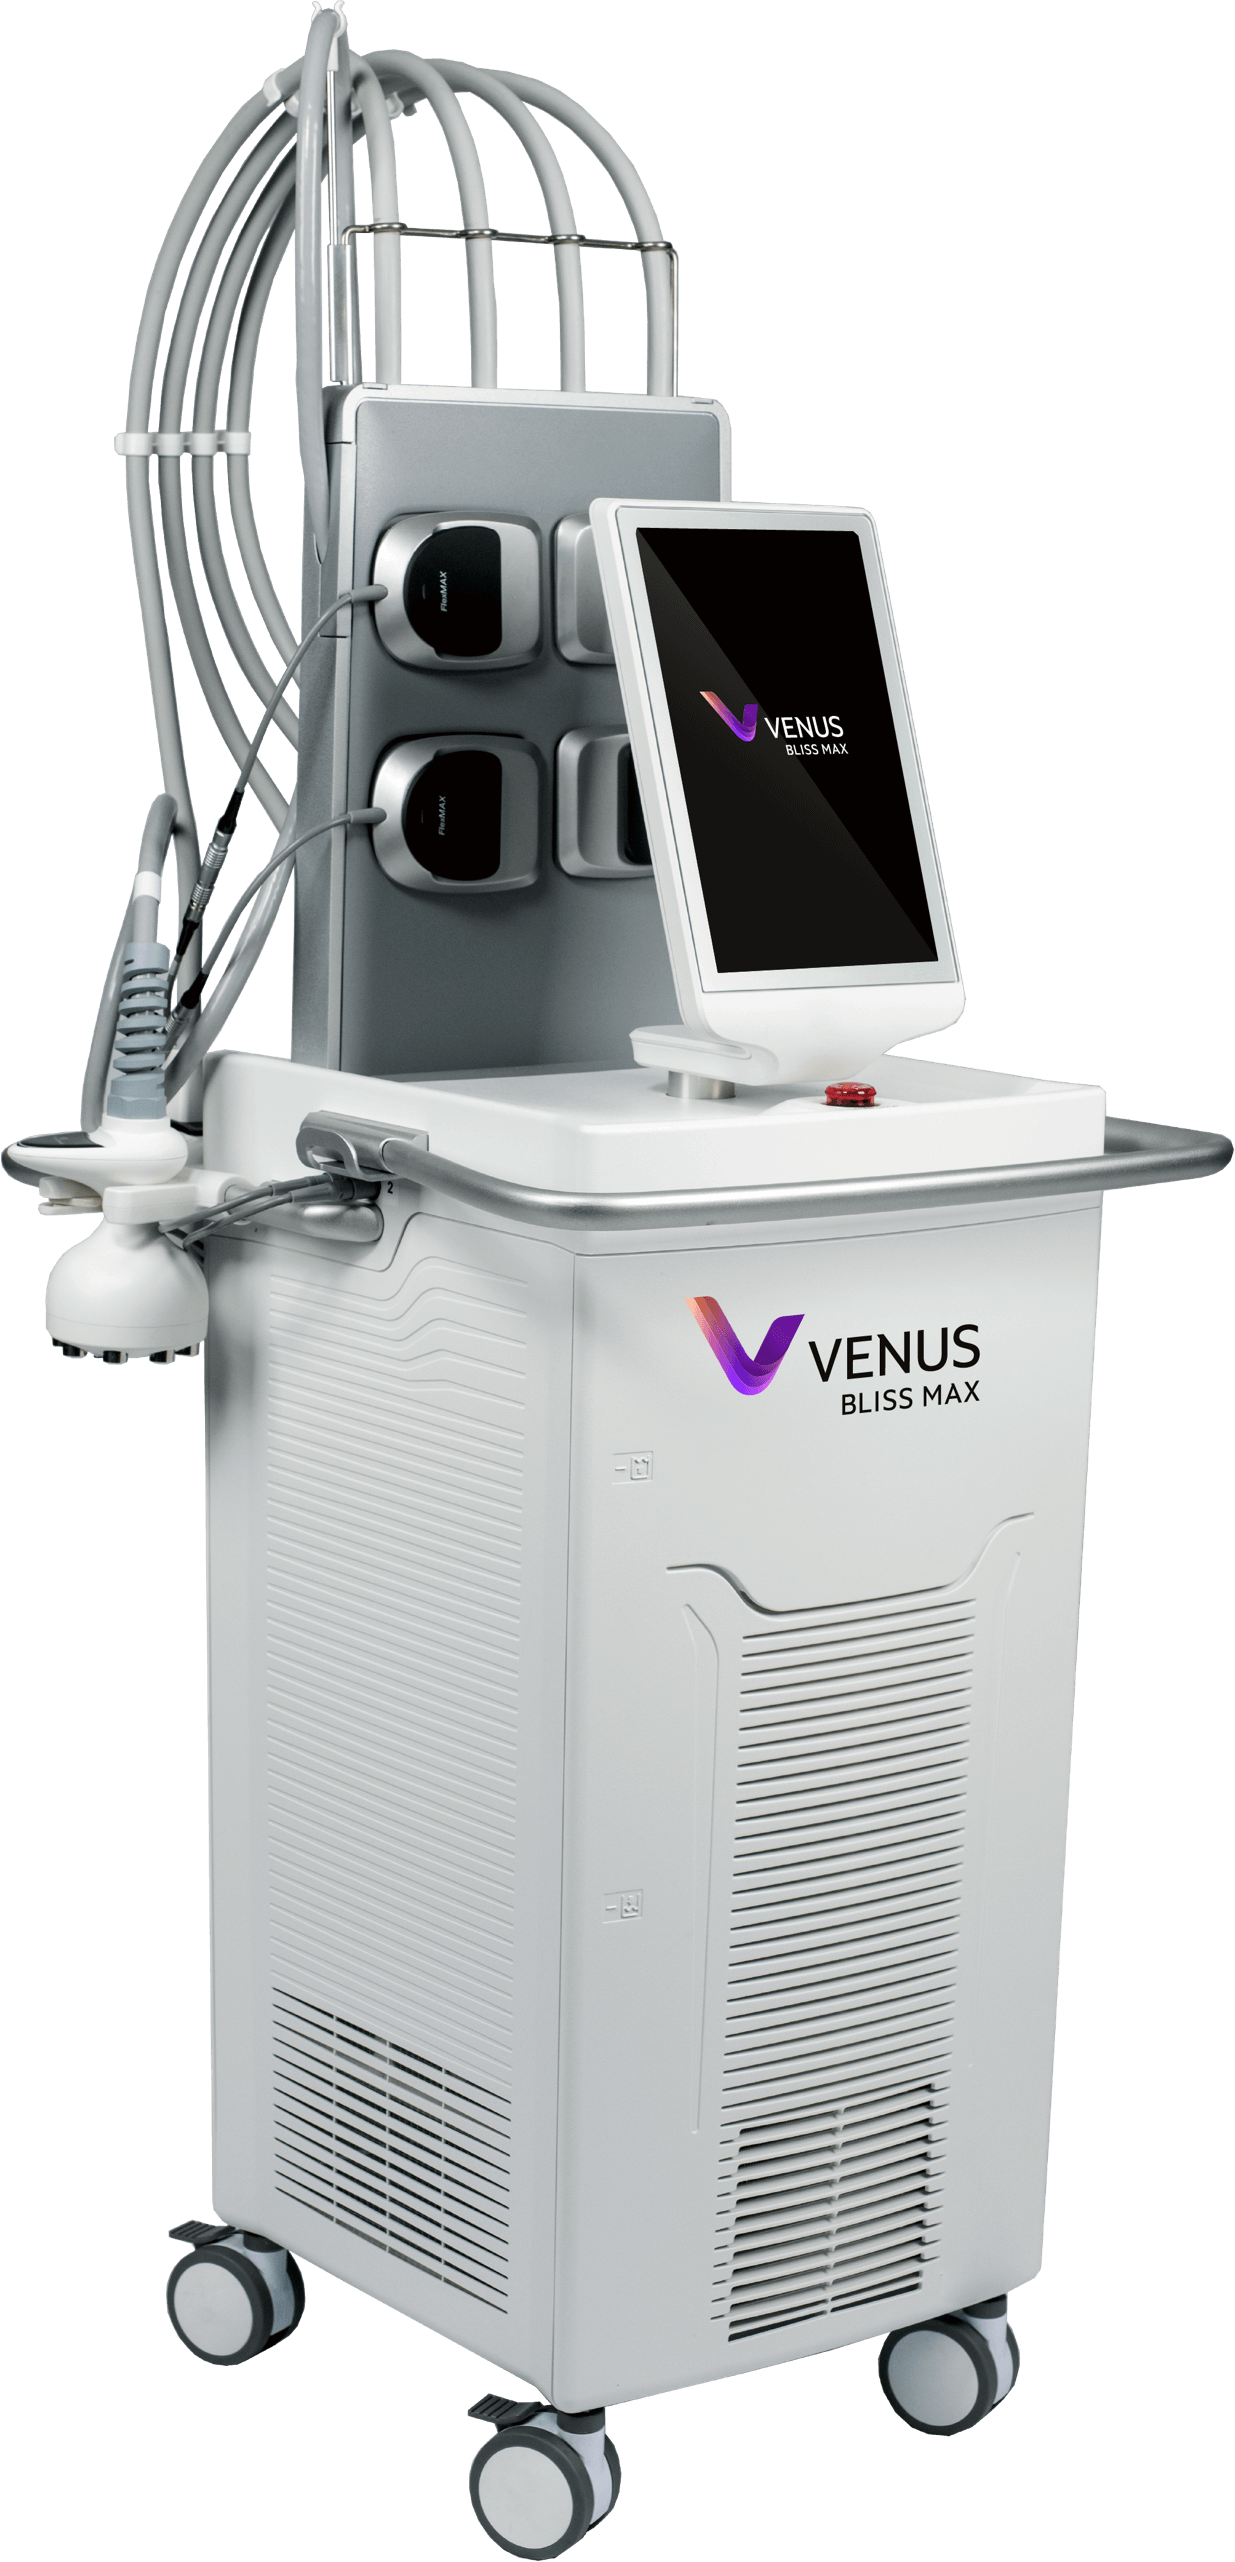 Venus Bliss MAX - Related Device